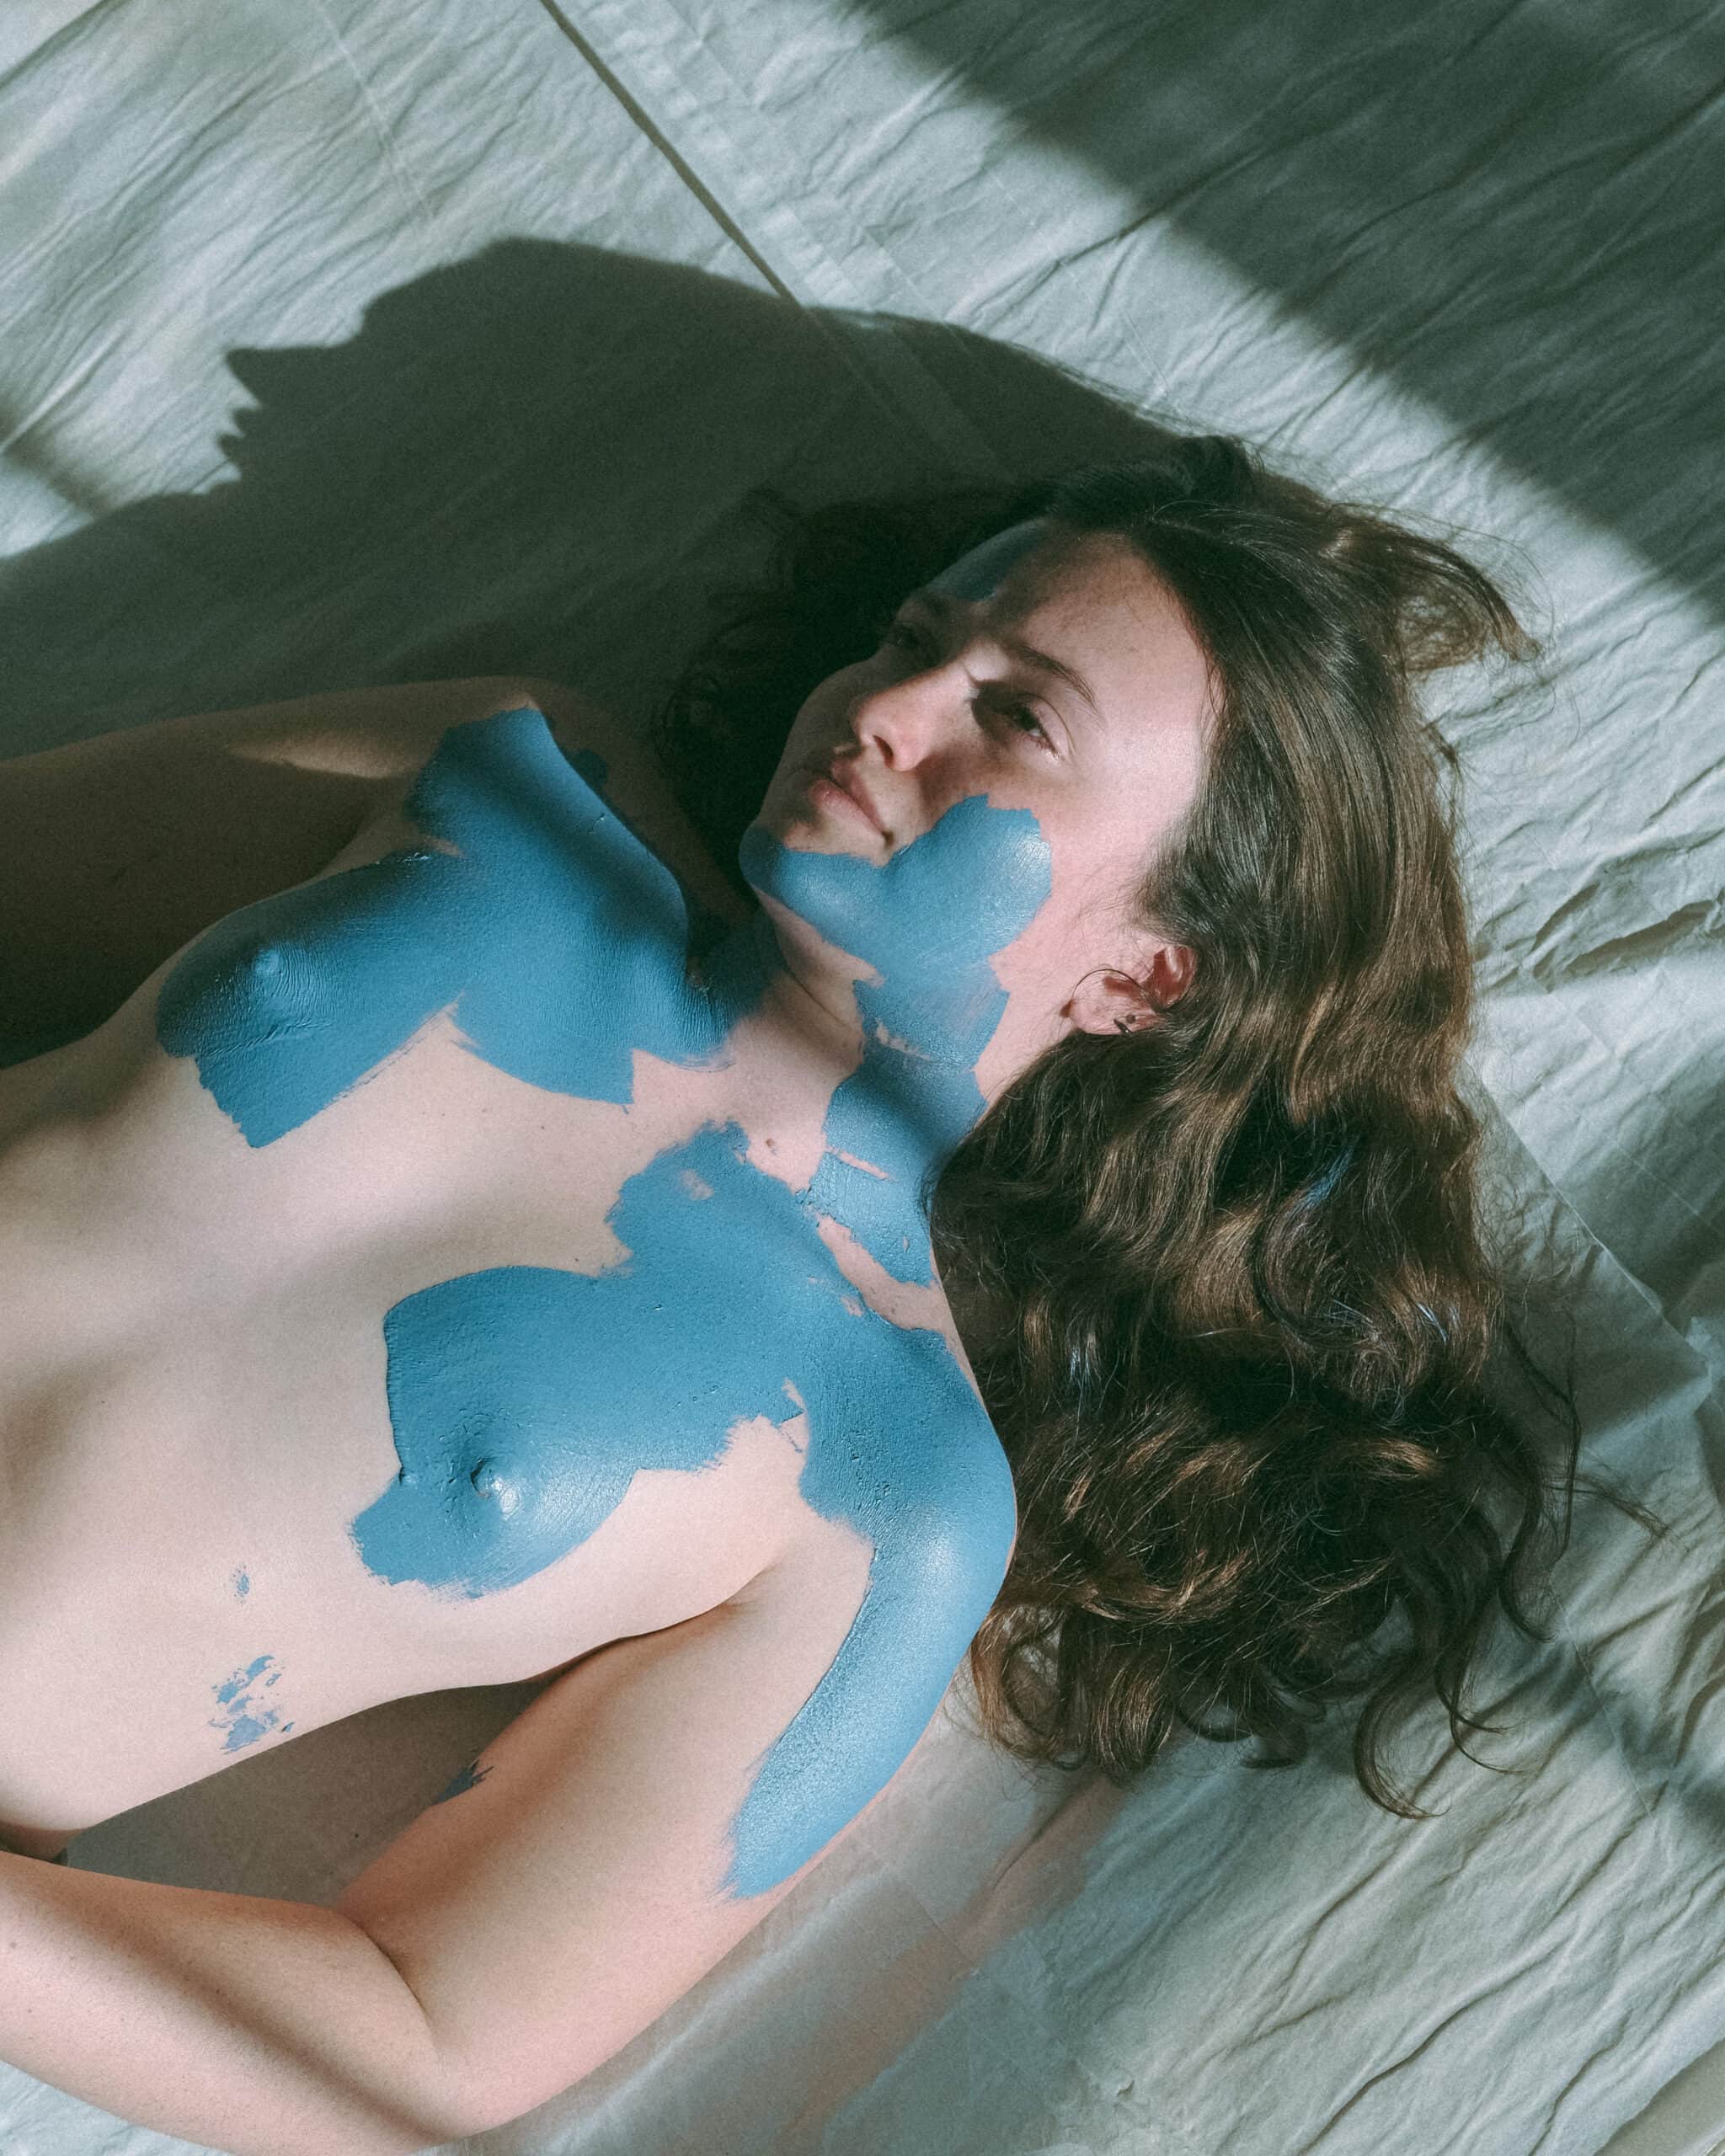 a woman during a creative model photoshoot laying on the ground painted blue